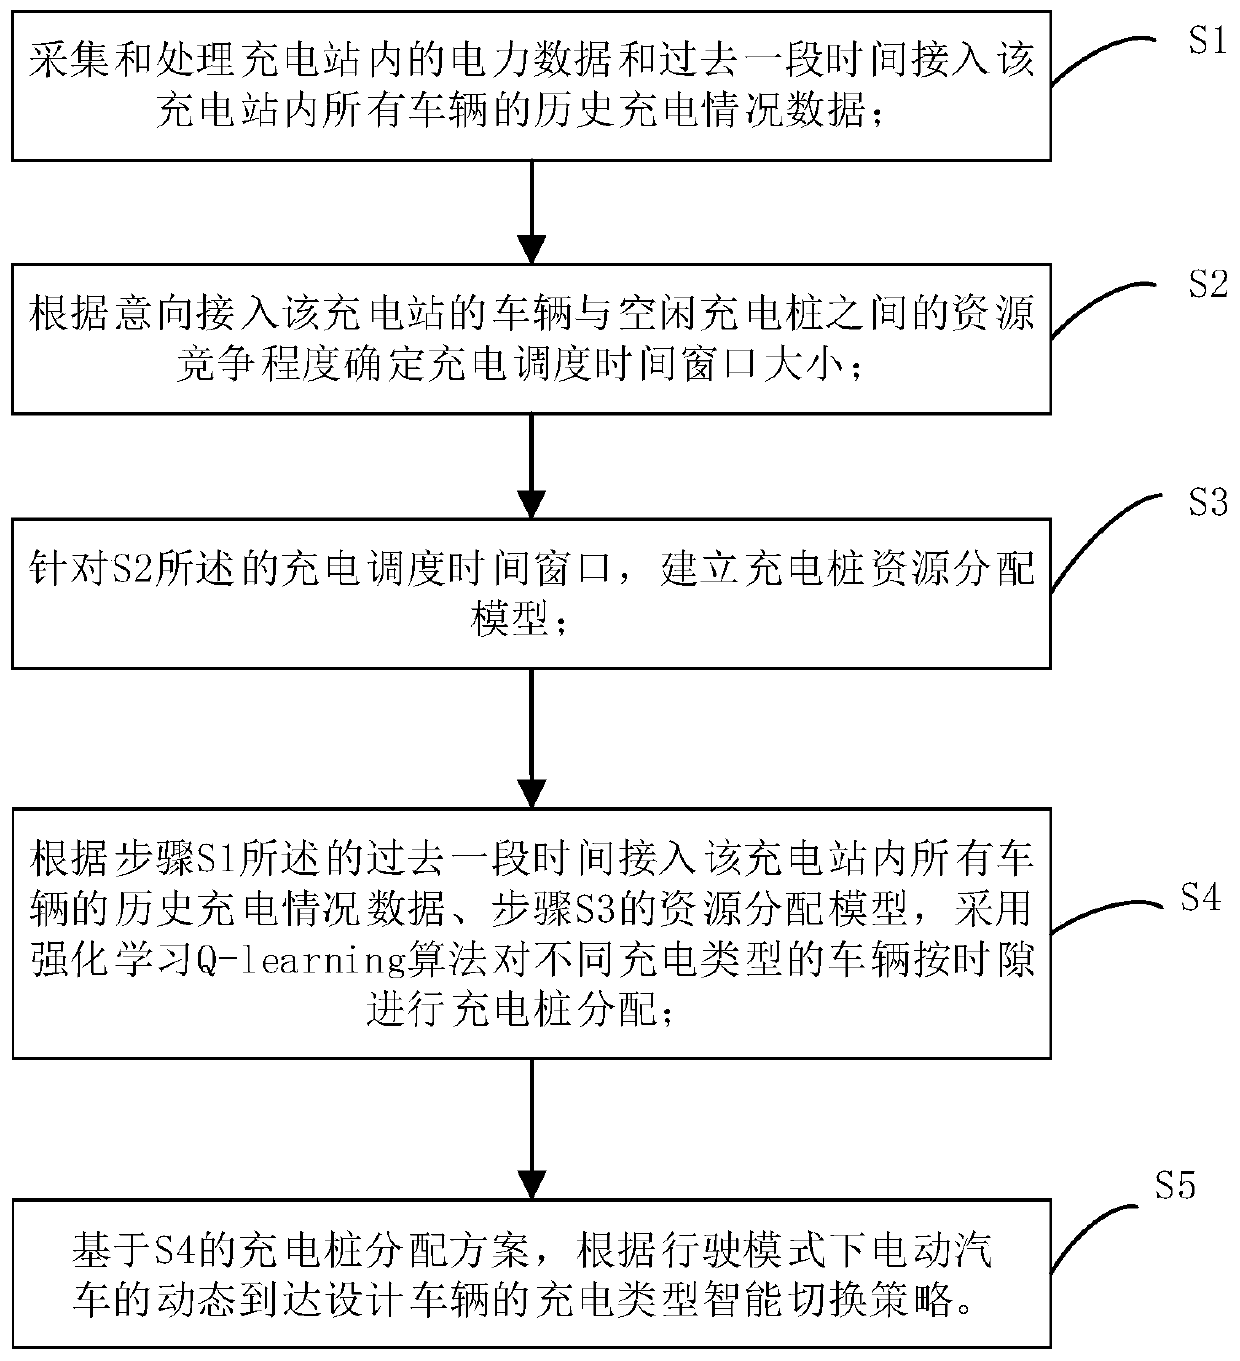 Electric vehicle charging scheduling method considering reservation and queuing in charging station